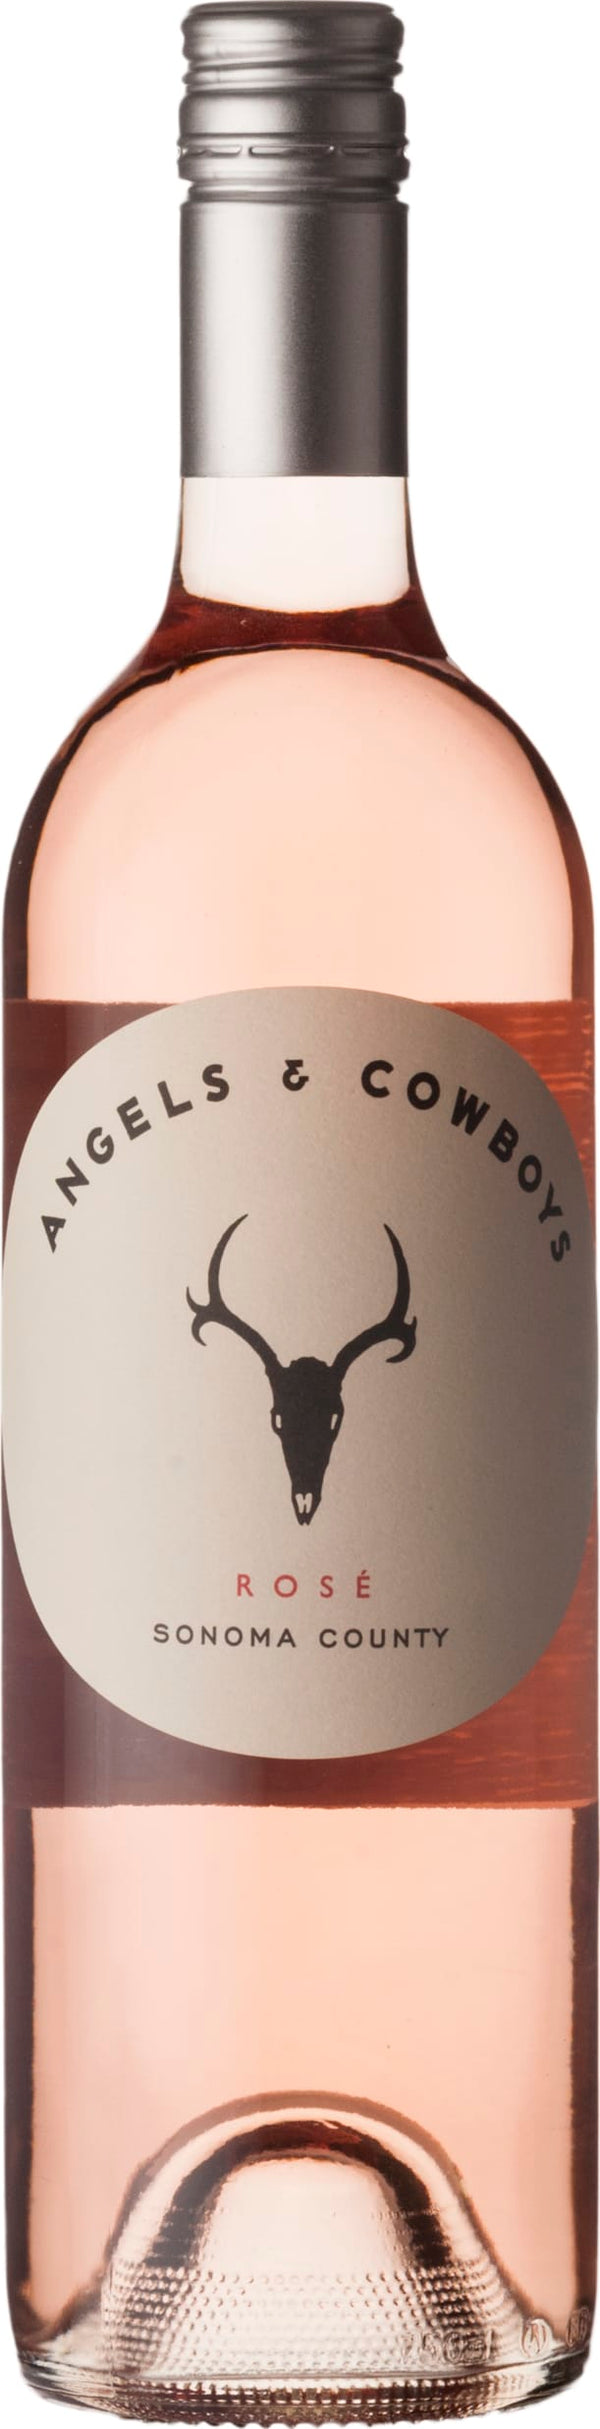 Angels and Cowboys Angels and Cowboys Rose 2022 6x75cl - Just Wines 